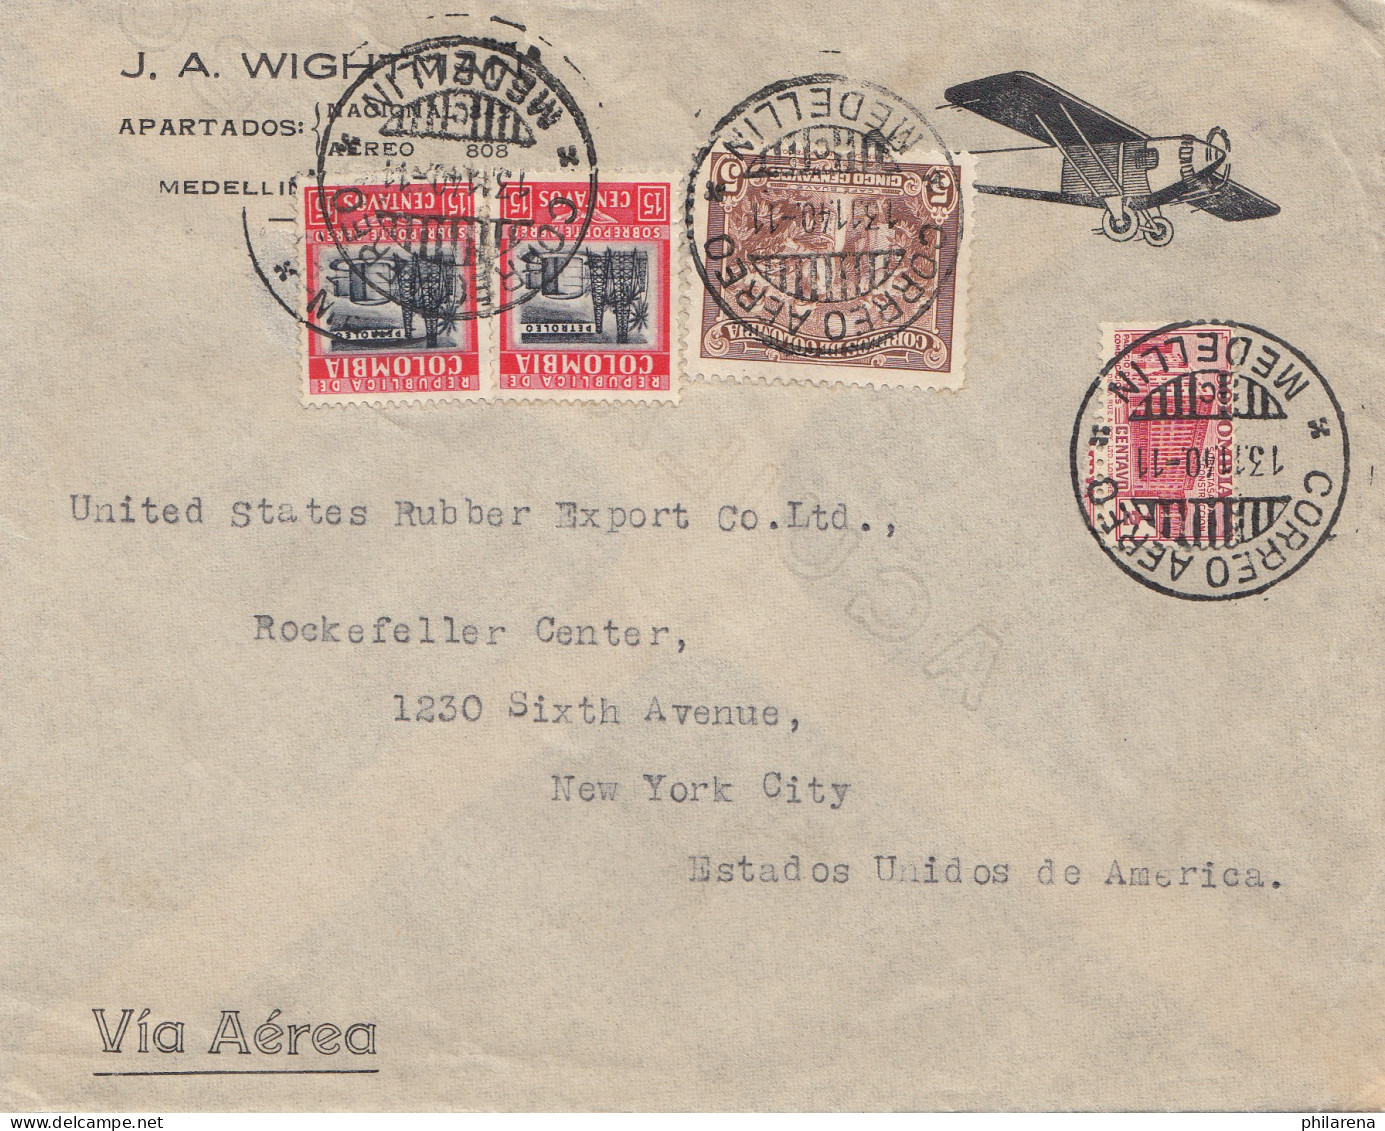 Colombia 1940: Air Mail Medellin To New York - Colombia